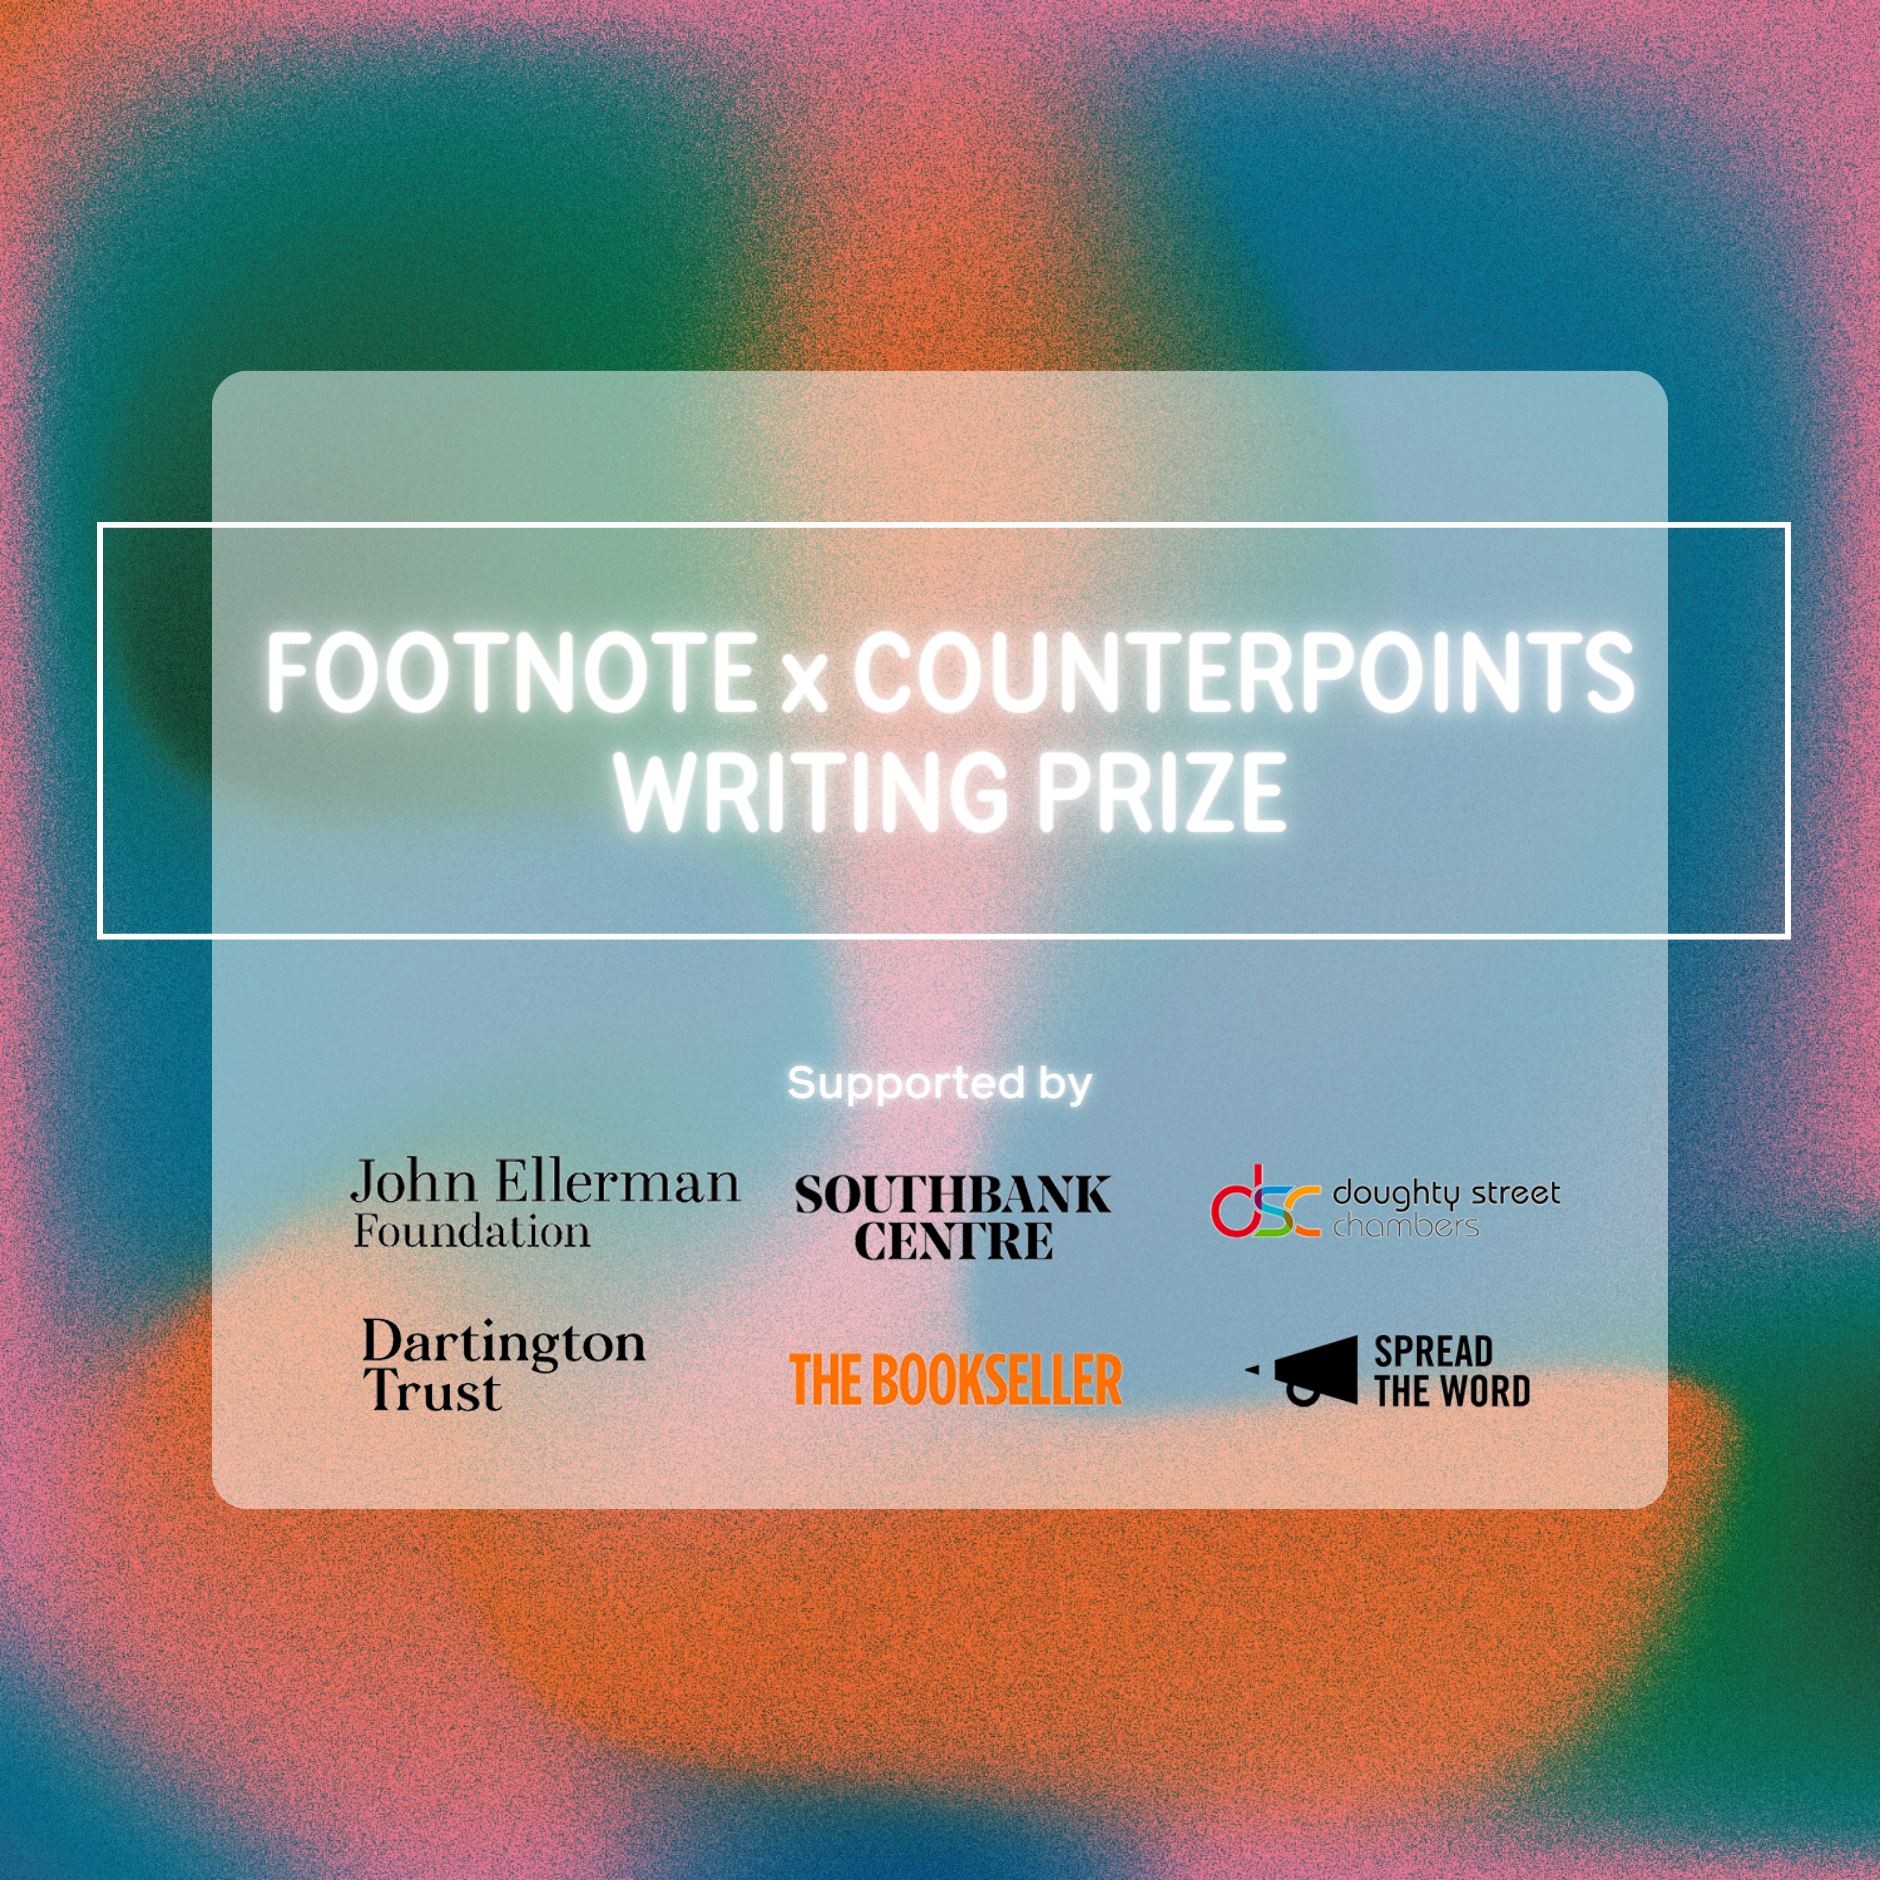 FOOTNOTE x COUNTERPOINTS WRITING PRIZE